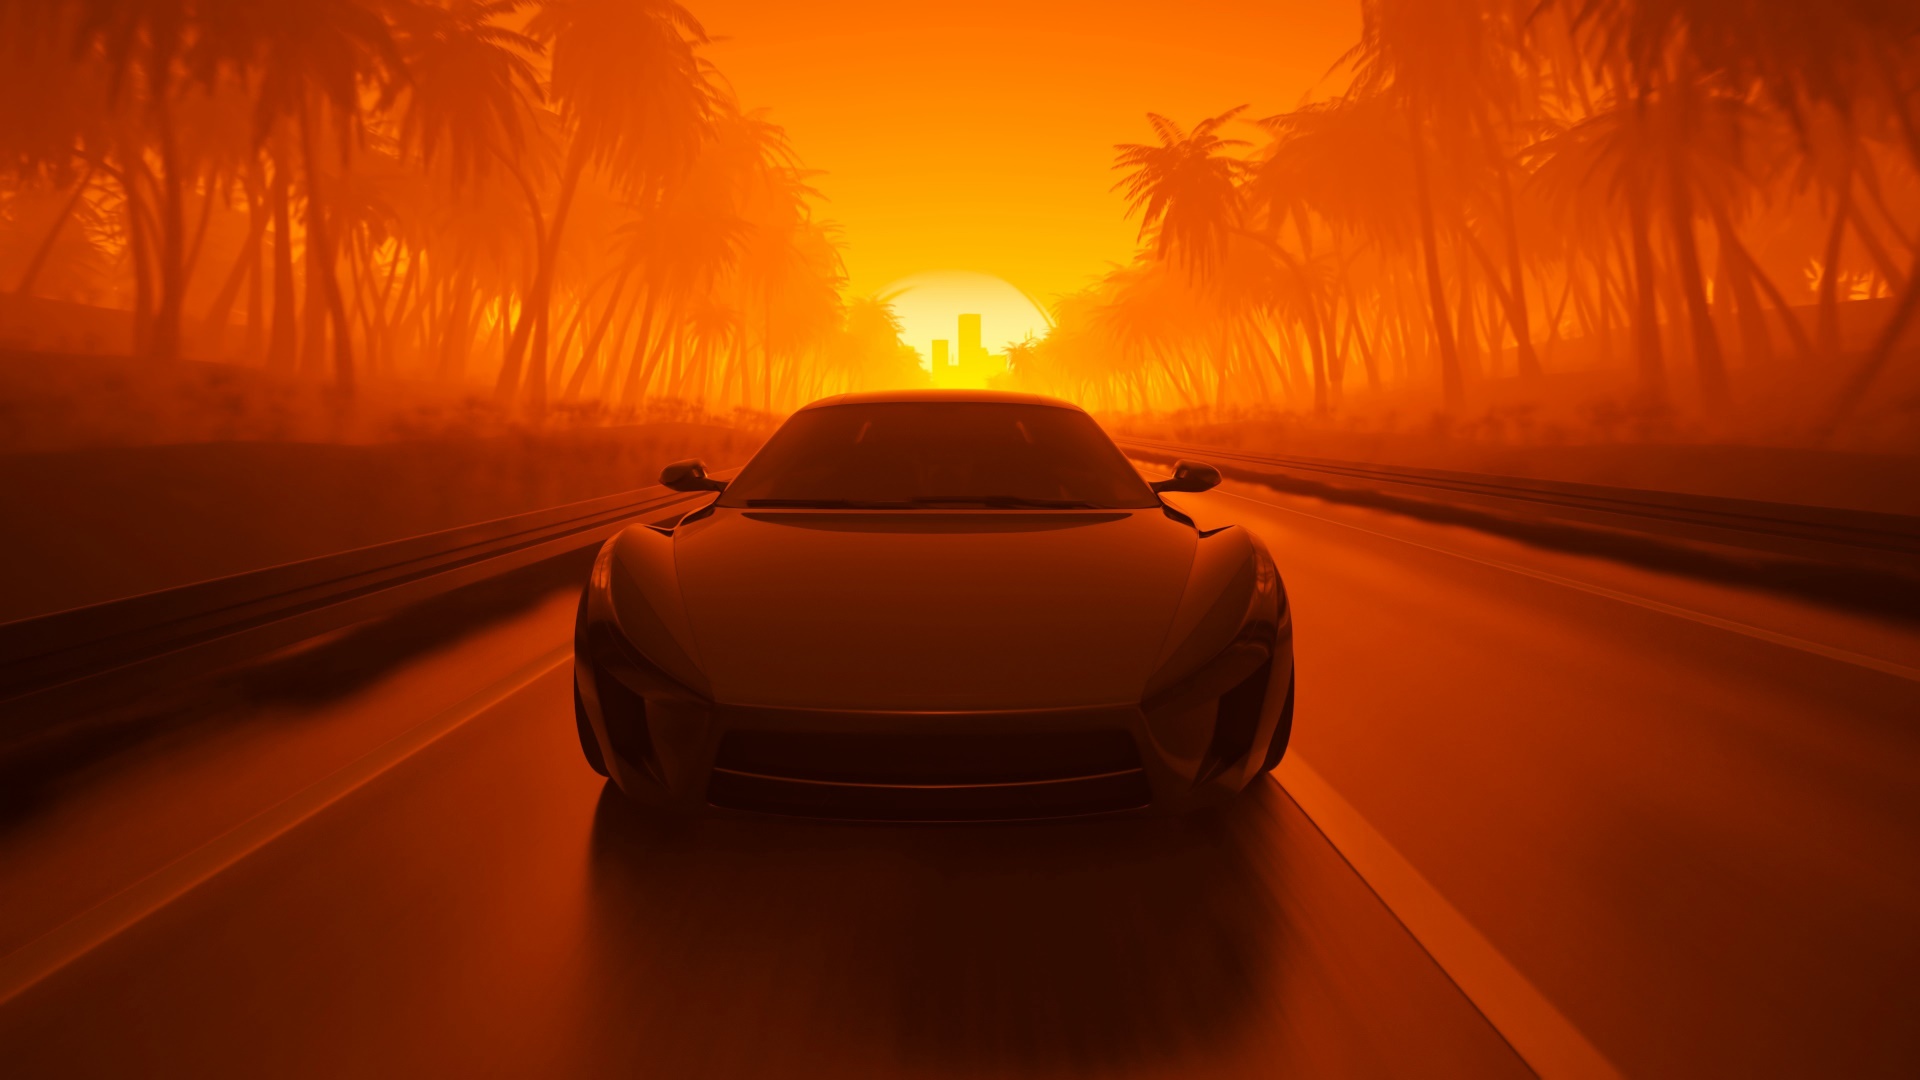 Road Car Synthwave, HD Artist, 4k Wallpapers, Images, Backgrounds